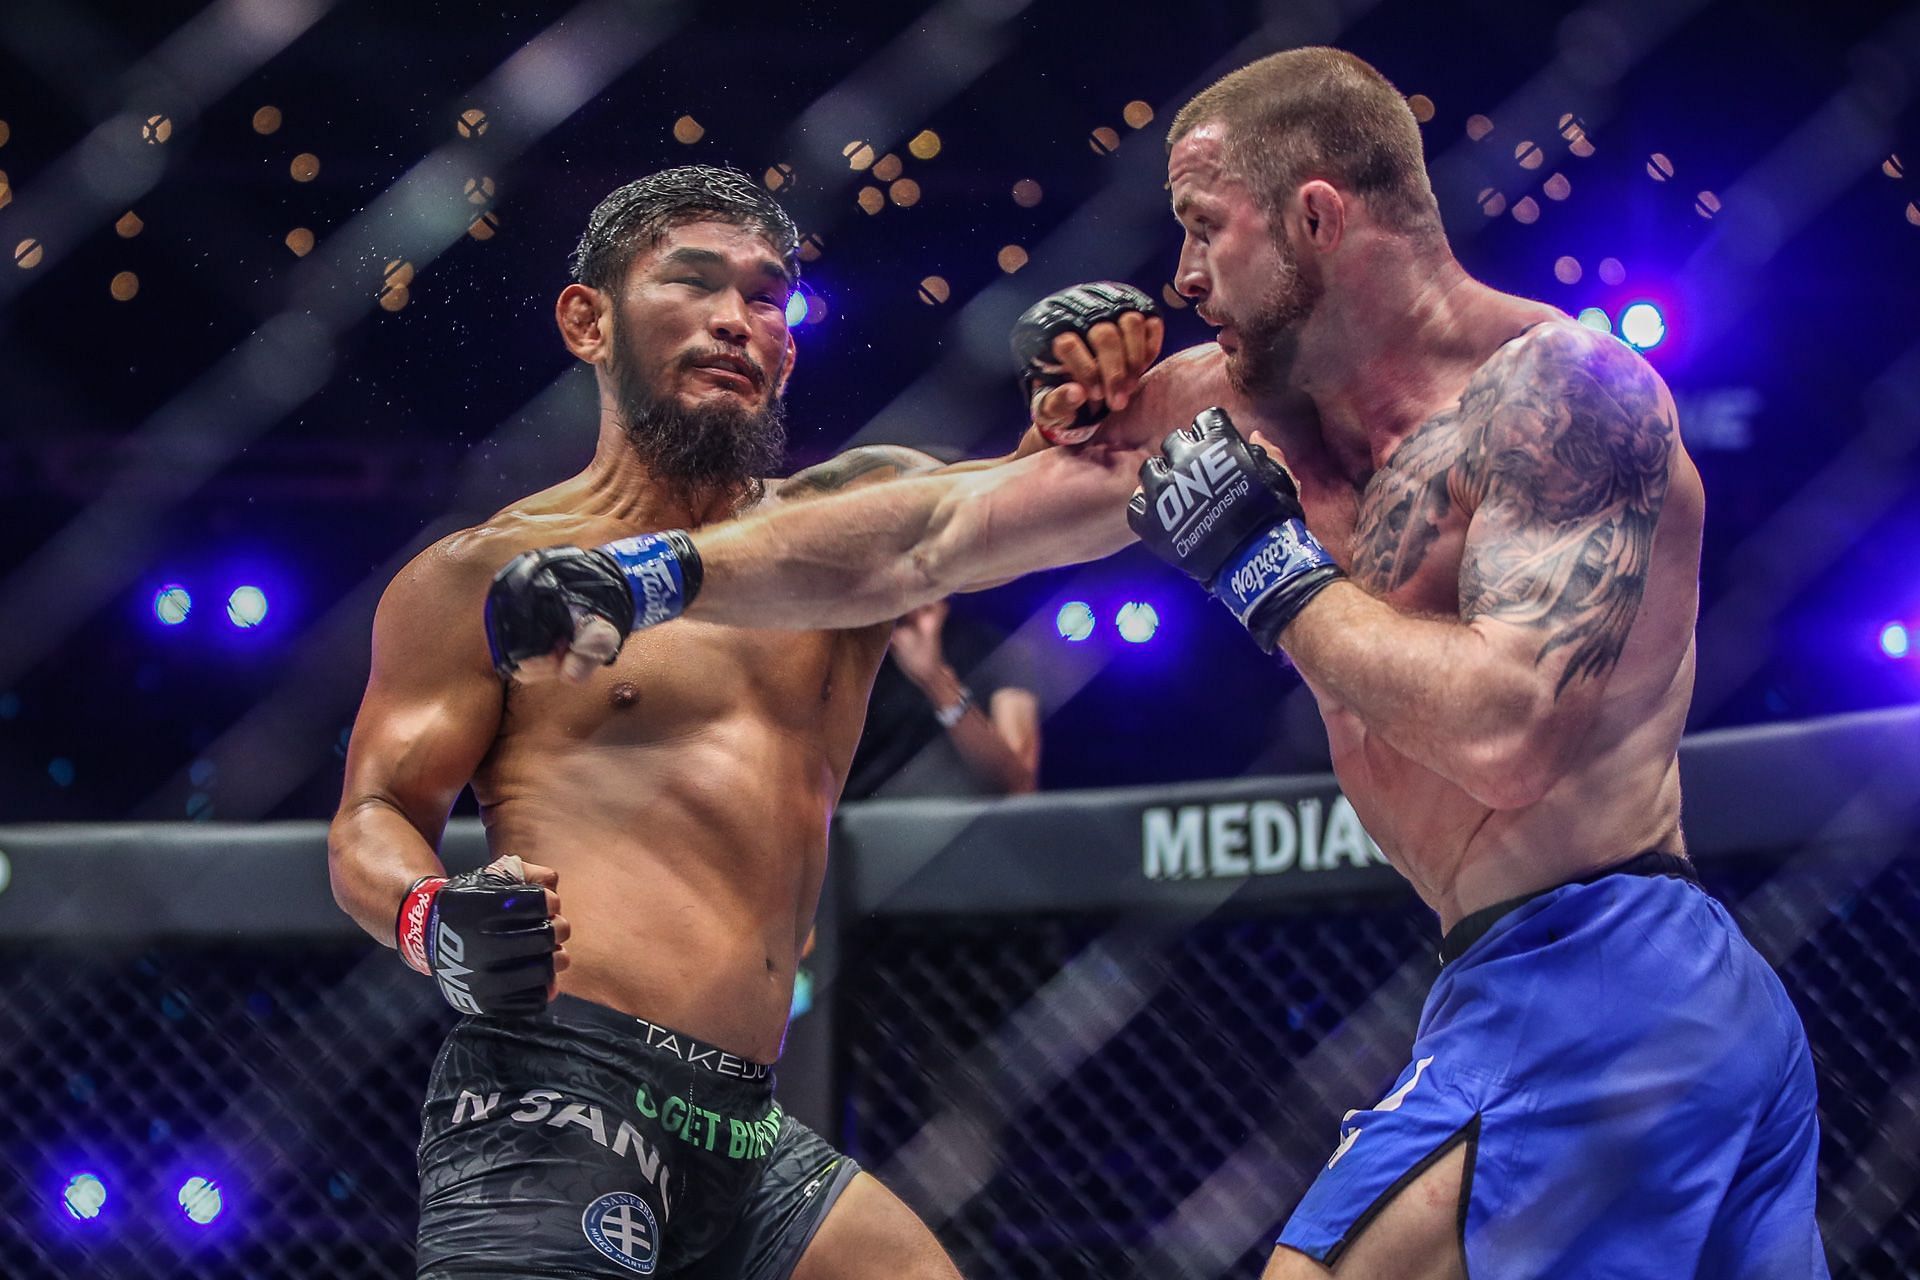 Aung La N Sang (left) and Vitaly Bigdash (right) [Photo Credit: ONE Championship]